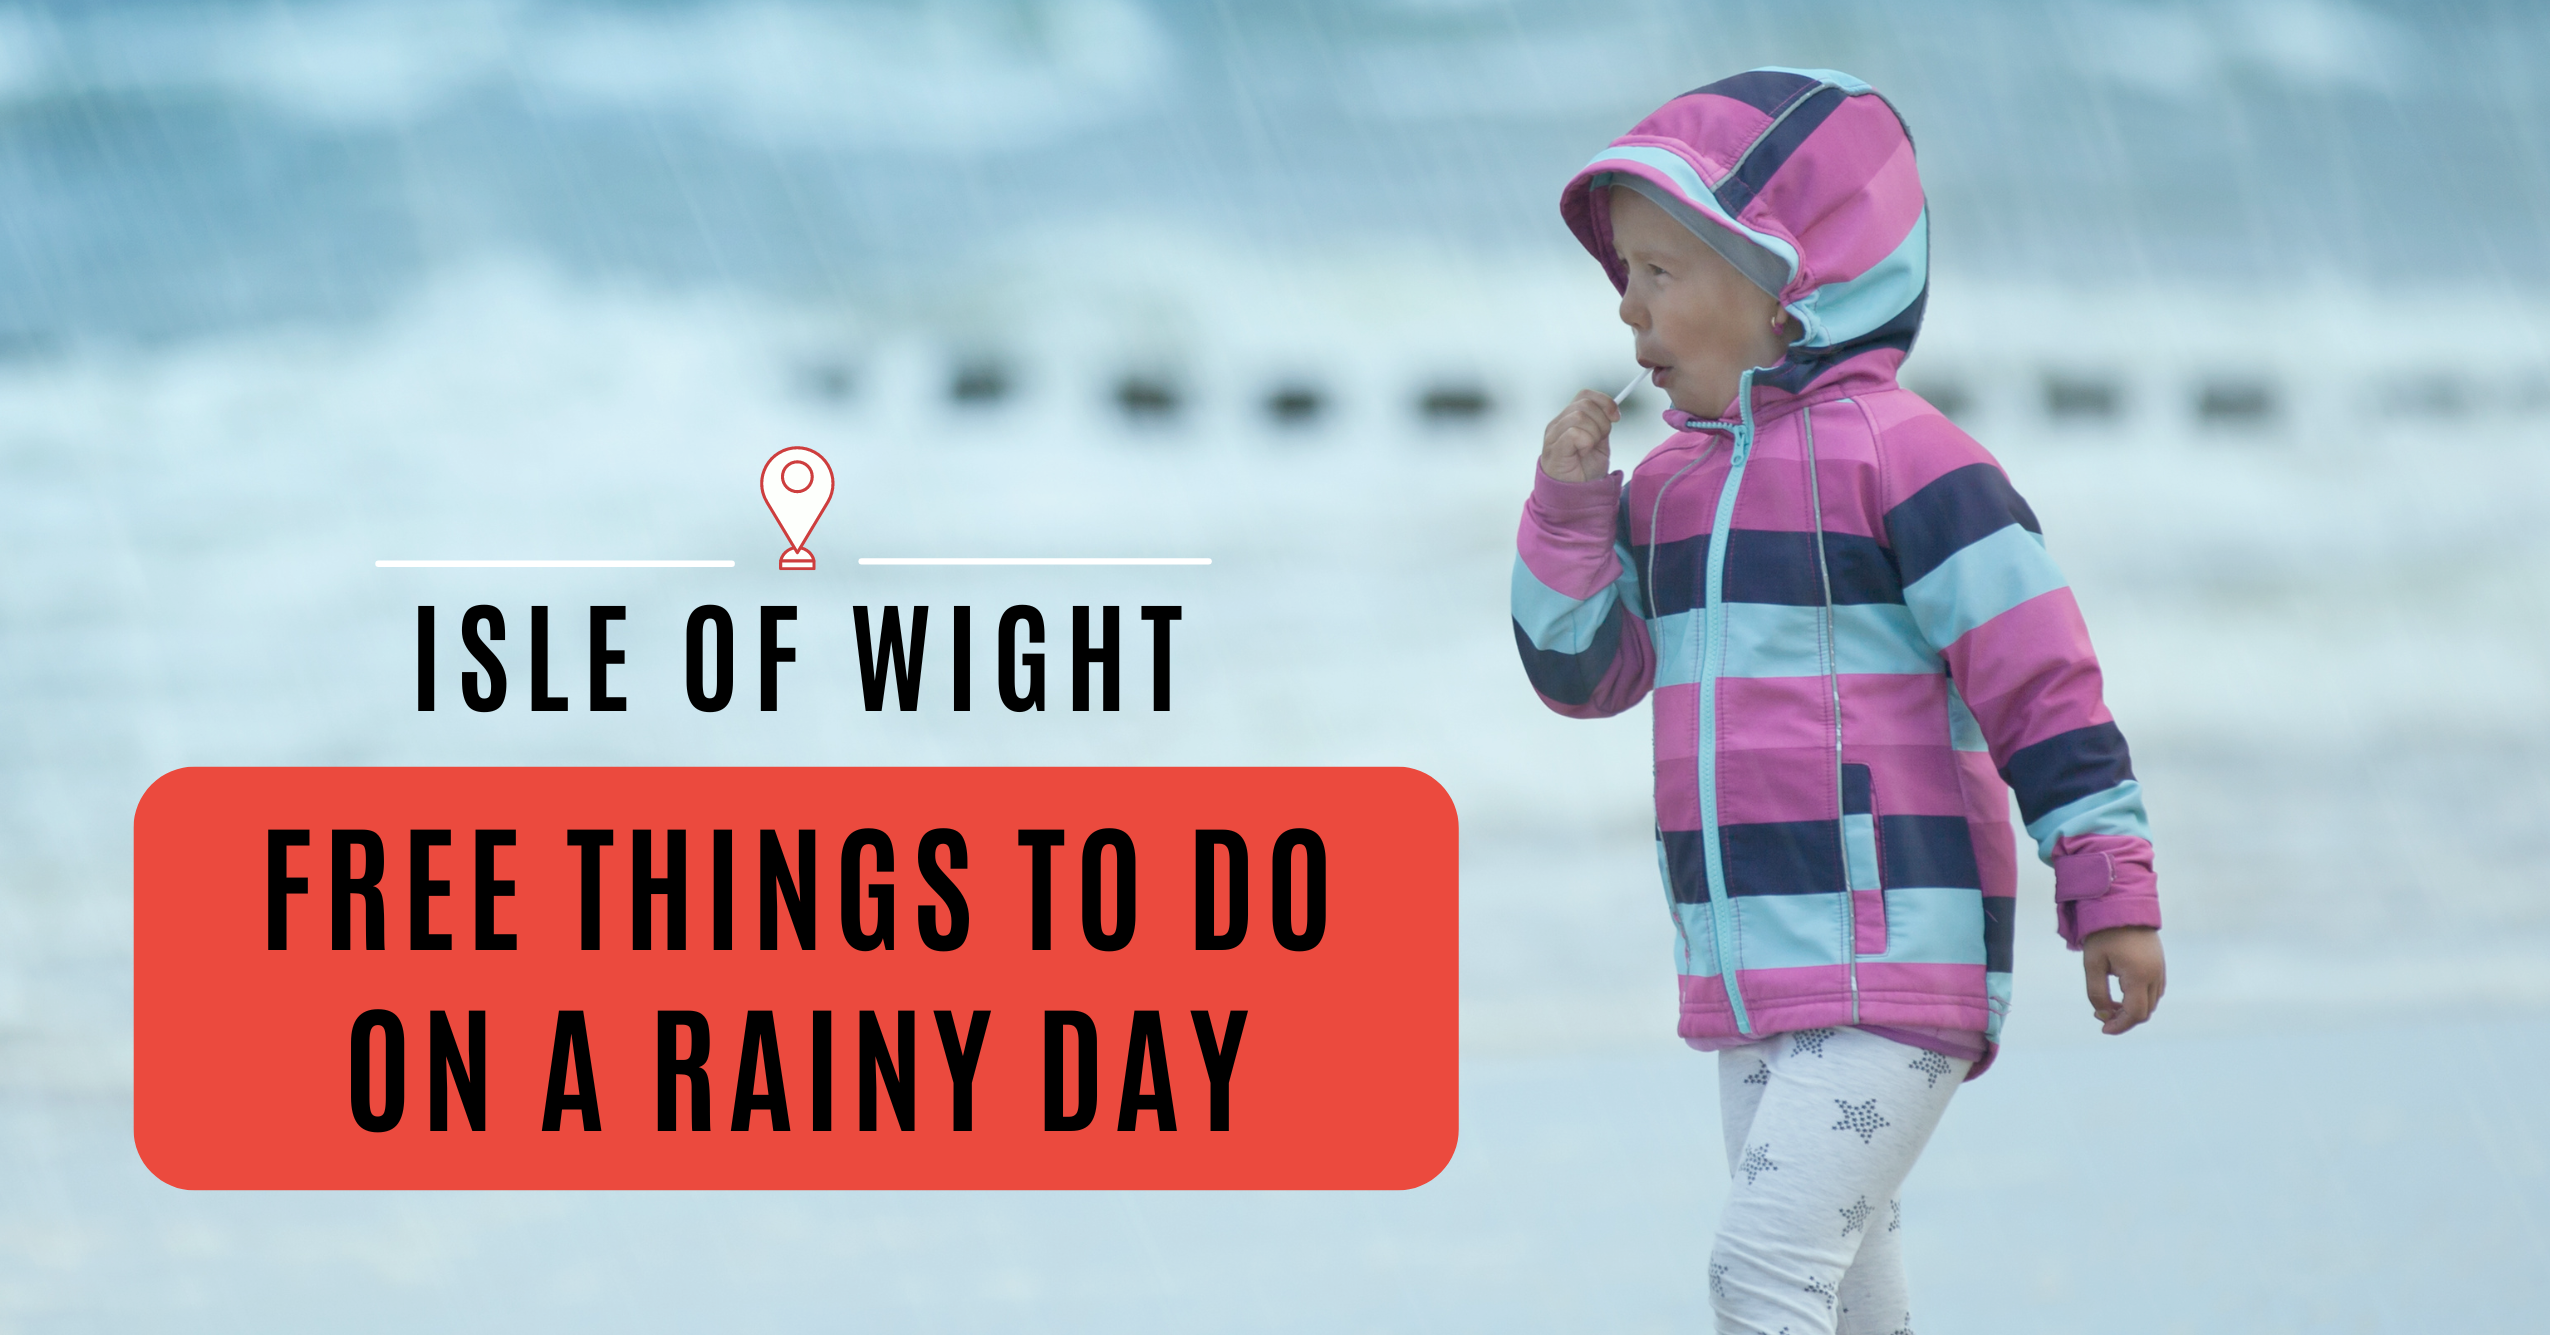 There is lots to do on the isle of wight in the rain